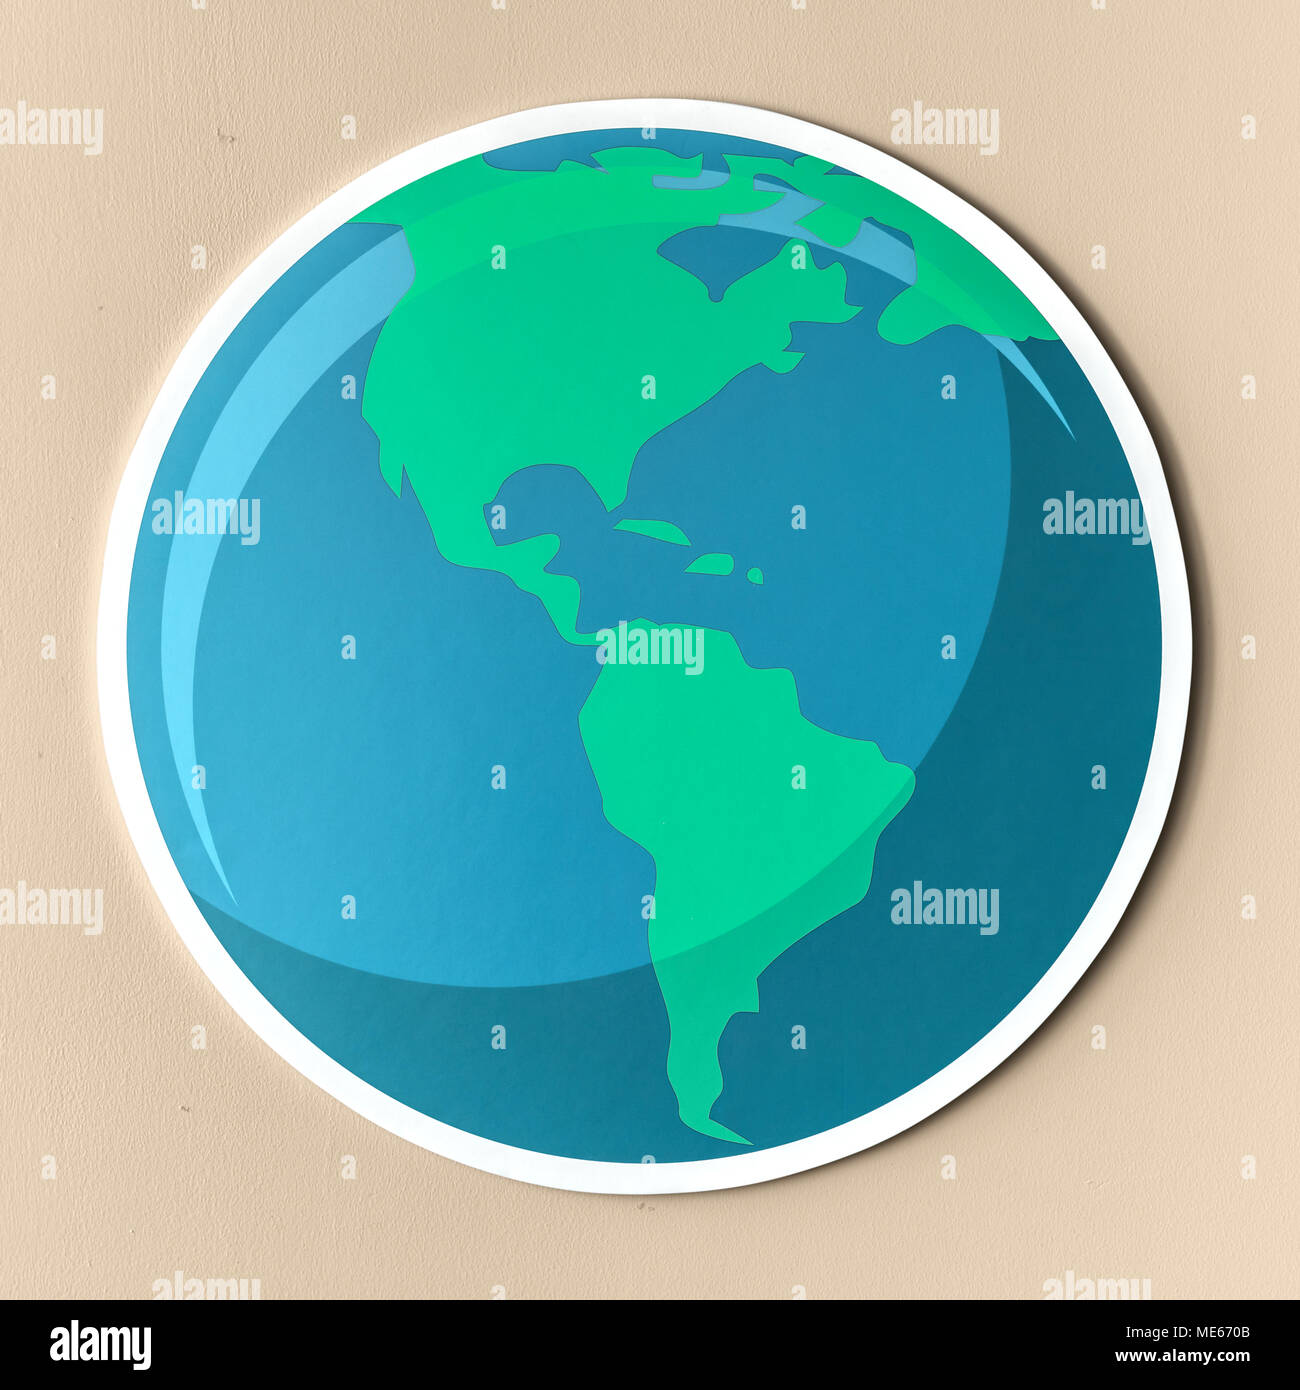 Cut out paper globe icon Stock Photo